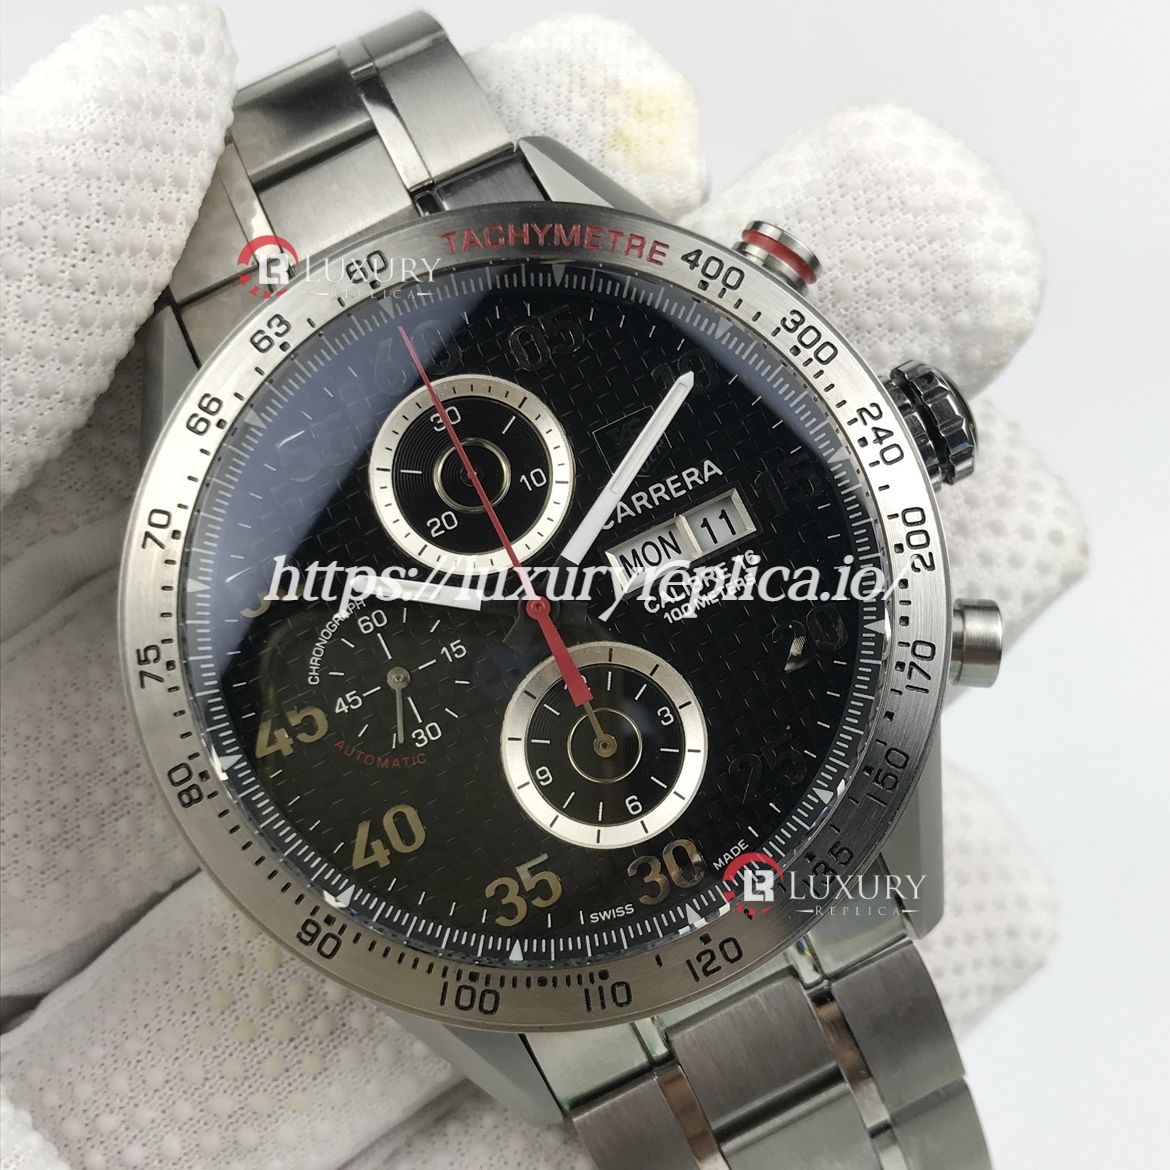 TAG HEUER CALIBRE 16 DAY DATE CHRONOGRAPH SWISS AUTOMATIC - BLACK CARBON FIBER DIAL - STAINLESS STEEL BRACELET